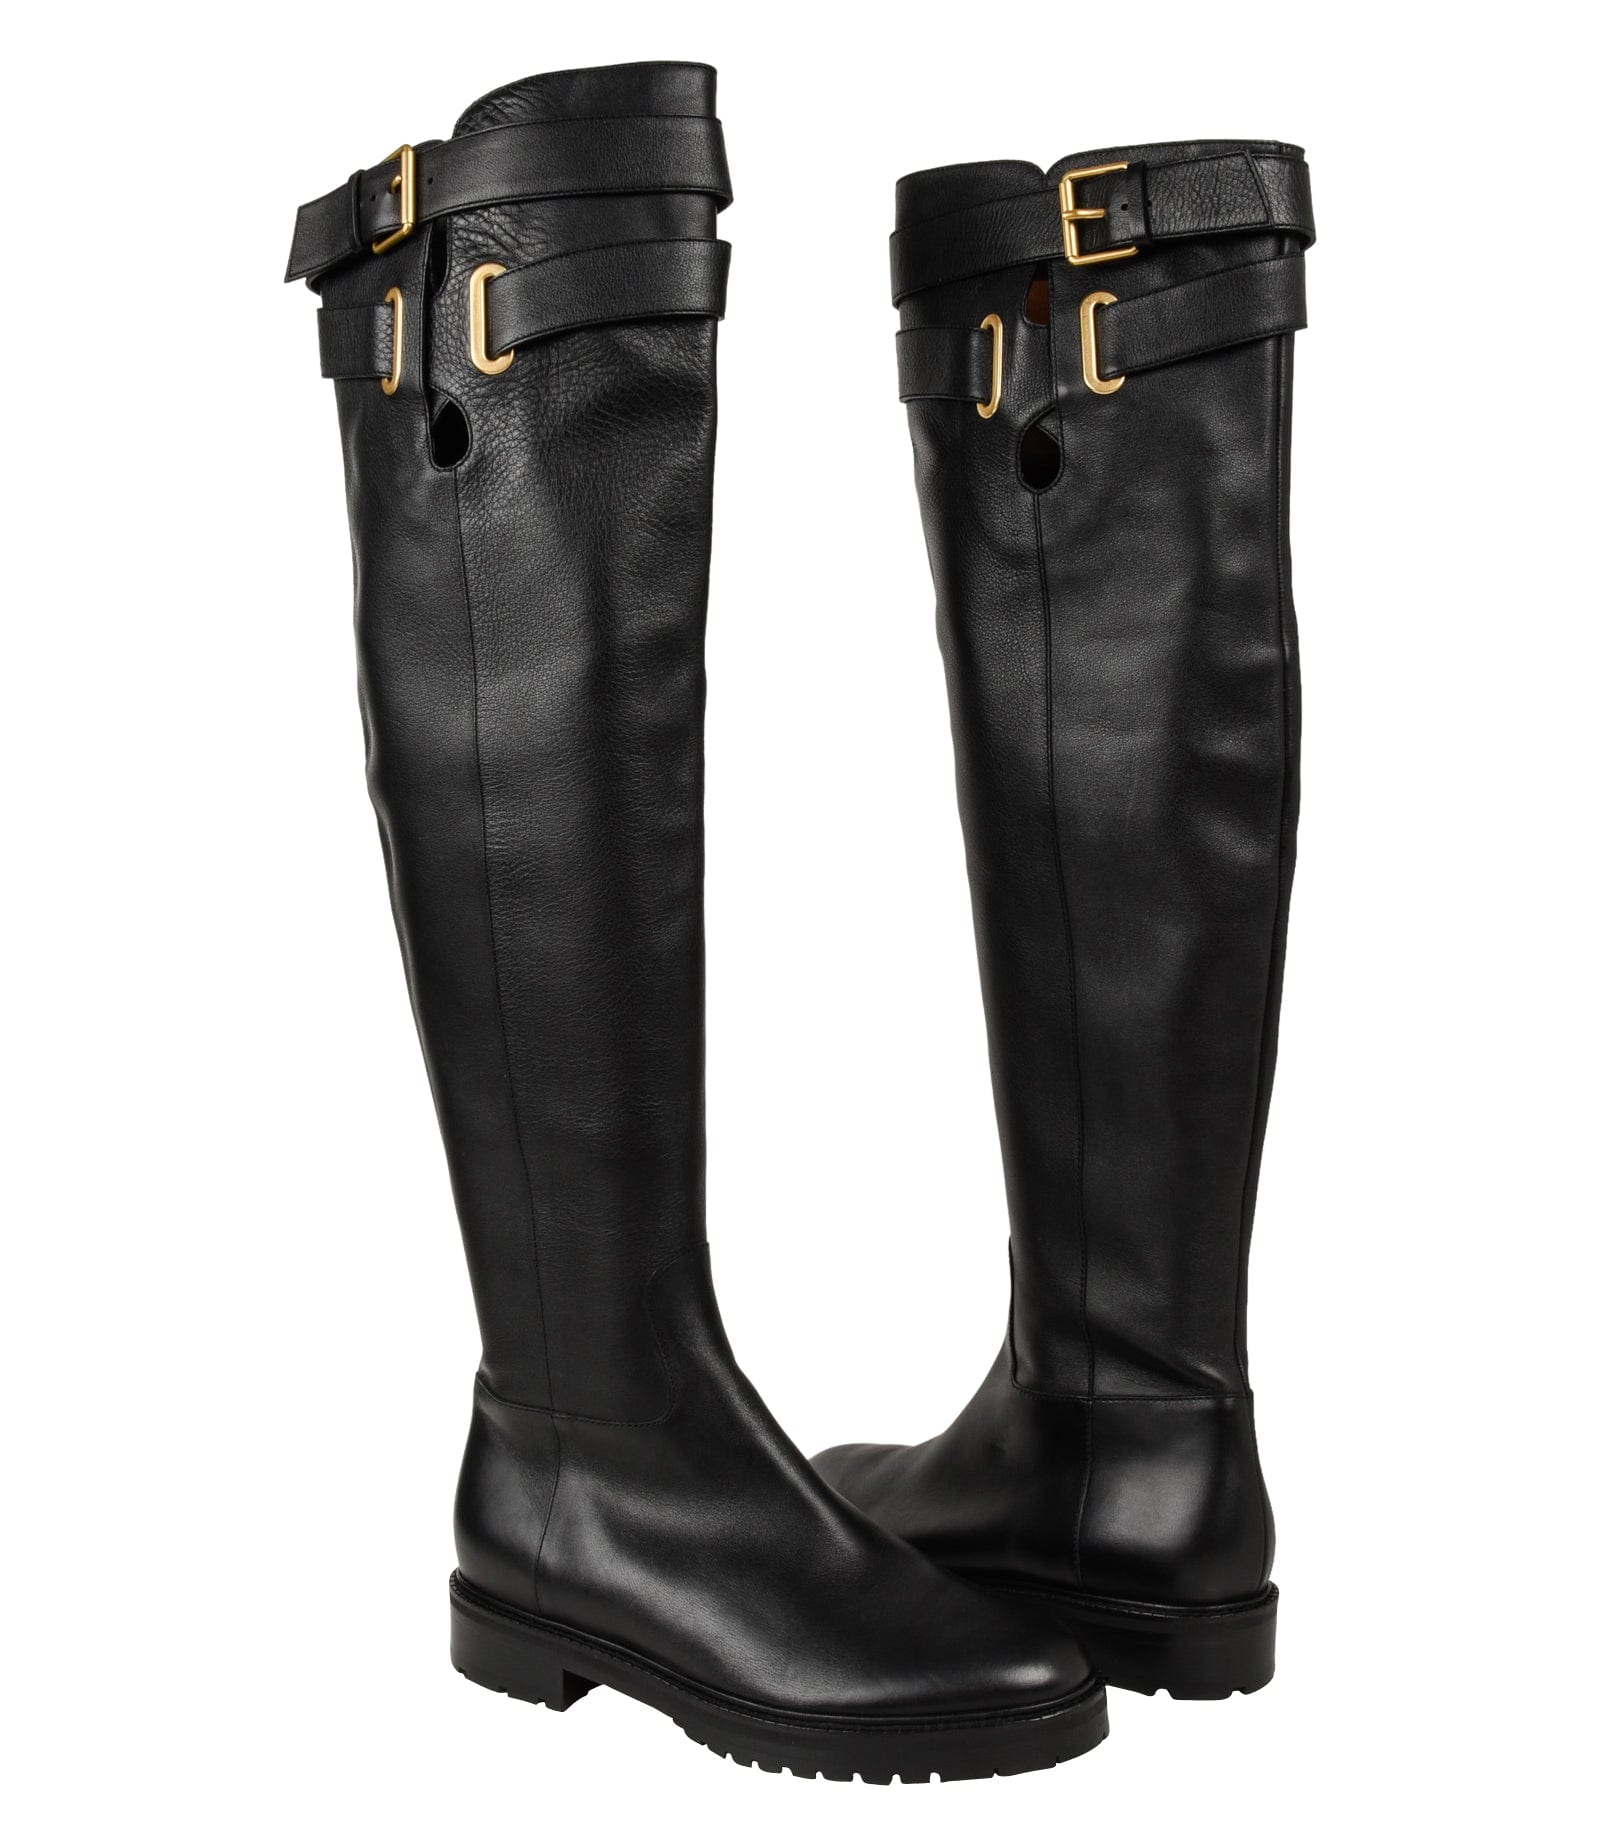 Valentino Boots Over Knee Black Flat Crisscross Straps w/ Buckle 39.5 / 9.5 New - mightychic